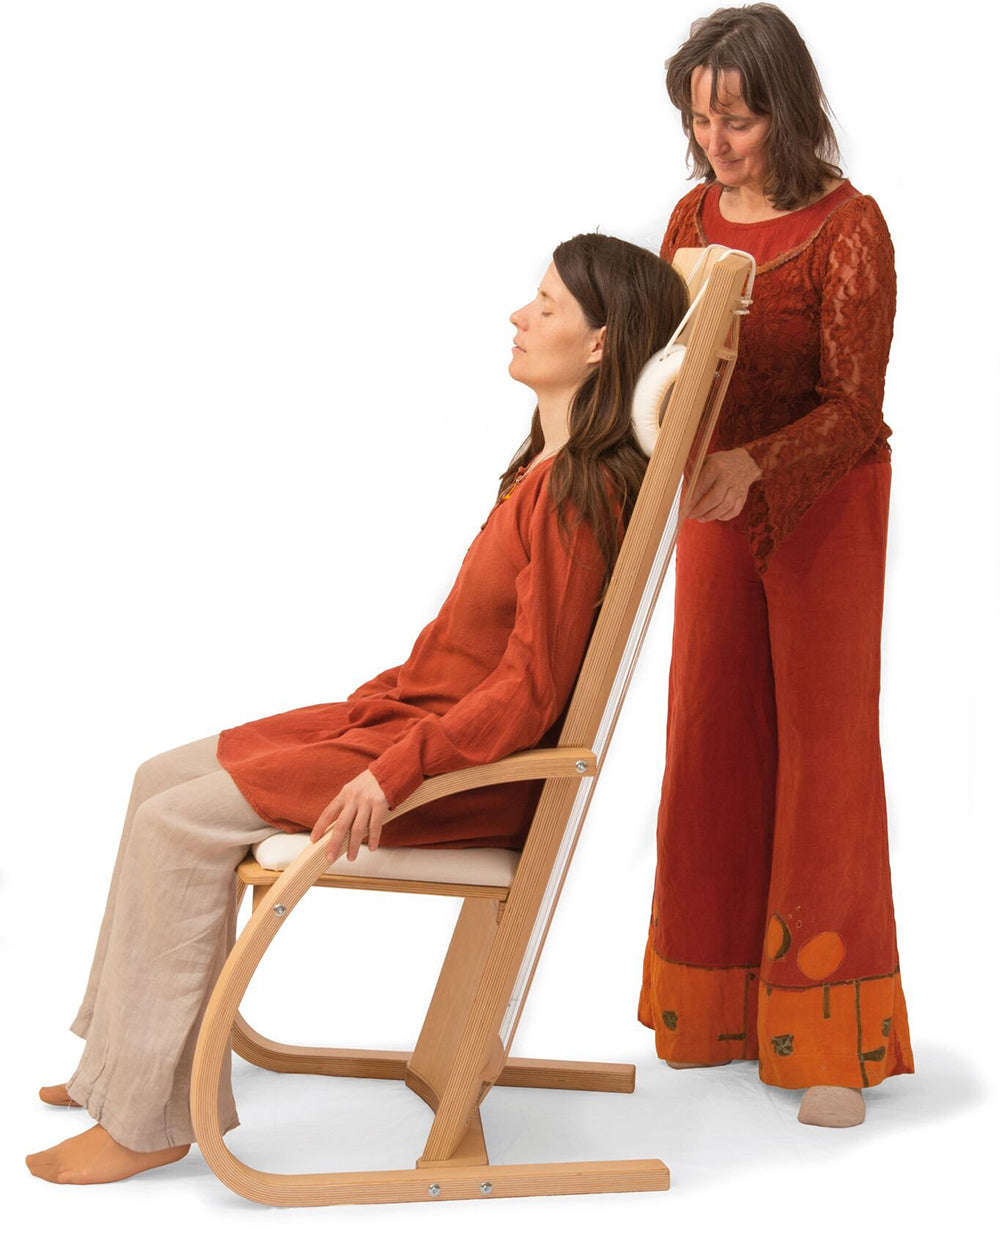 A woman sitting on feeltone Monchair while another woman is playing the strings attached to the chair. | weplaywelltogether